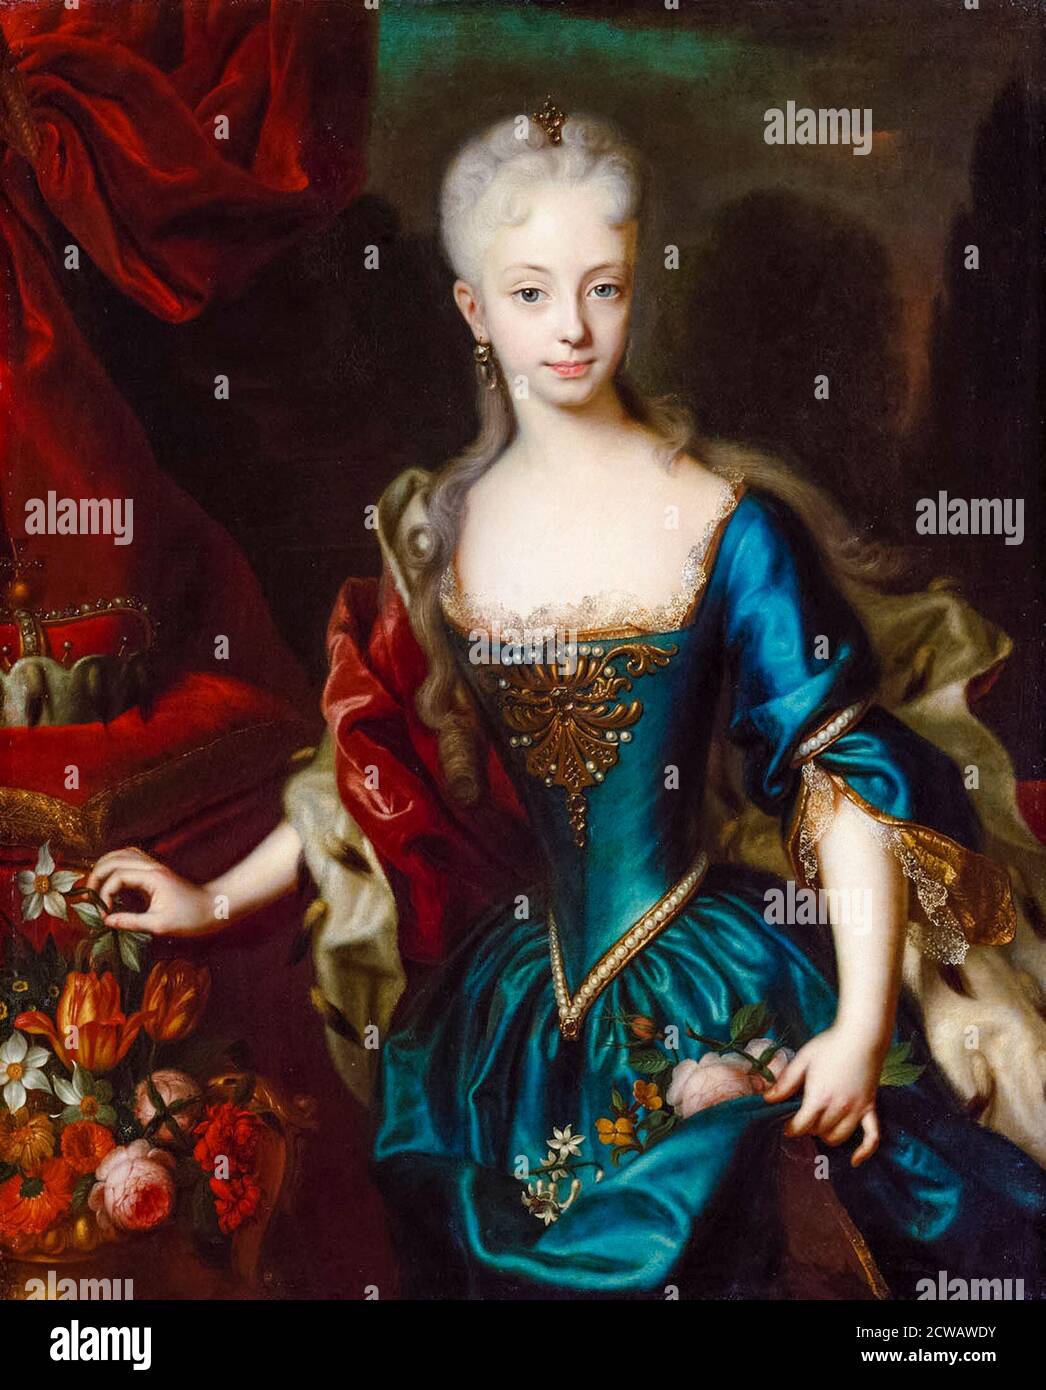 Maria Theresa (1717-1780), Archduchess of Austria, as a young girl, later Queen of Hungary and Bohemia, Holy Roman Empress, portrait painting by Andreas Moller, circa 1727 Stock Photo